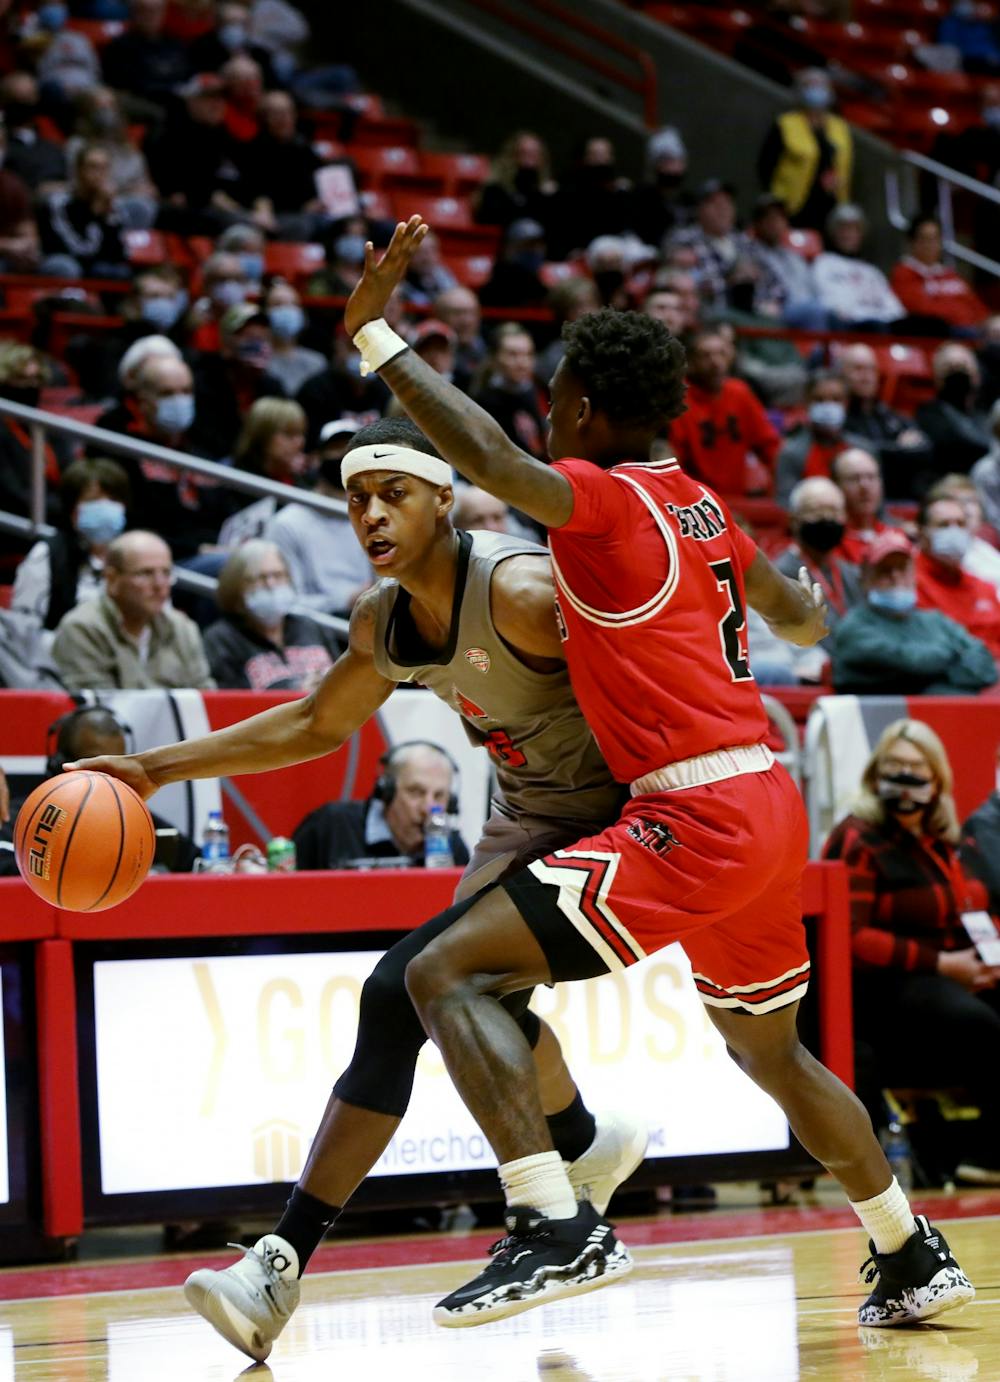 Cardinals place 5 in double figures, defeat Falcons to complete season sweep